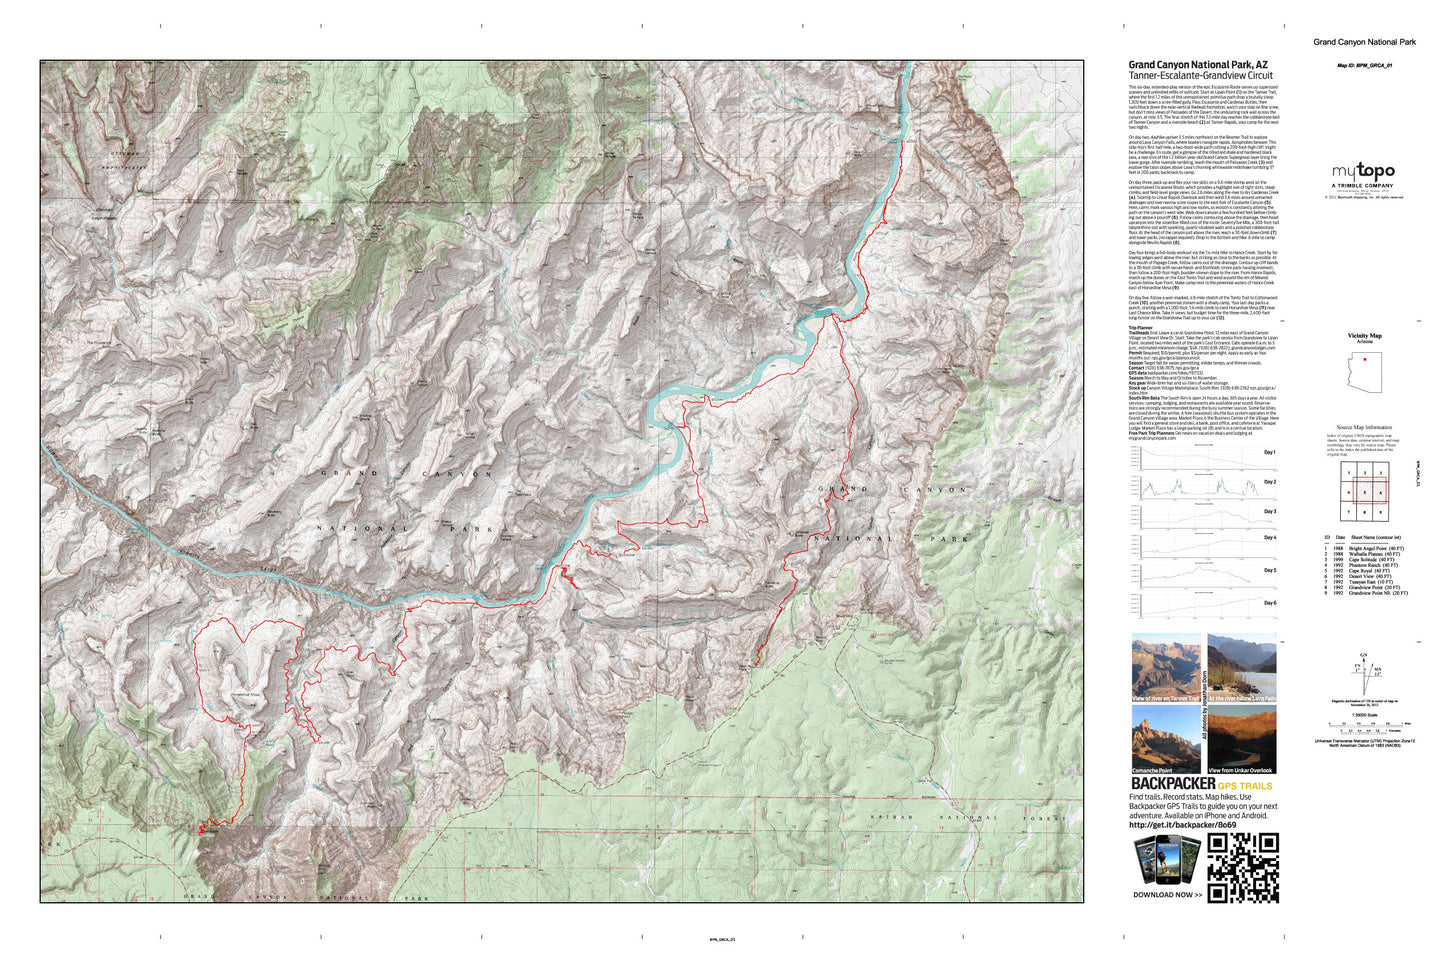 Tanner Trail-Escalante Route-Grandview Trail Loop Map (Grand Canyon NP, Arizona) Image